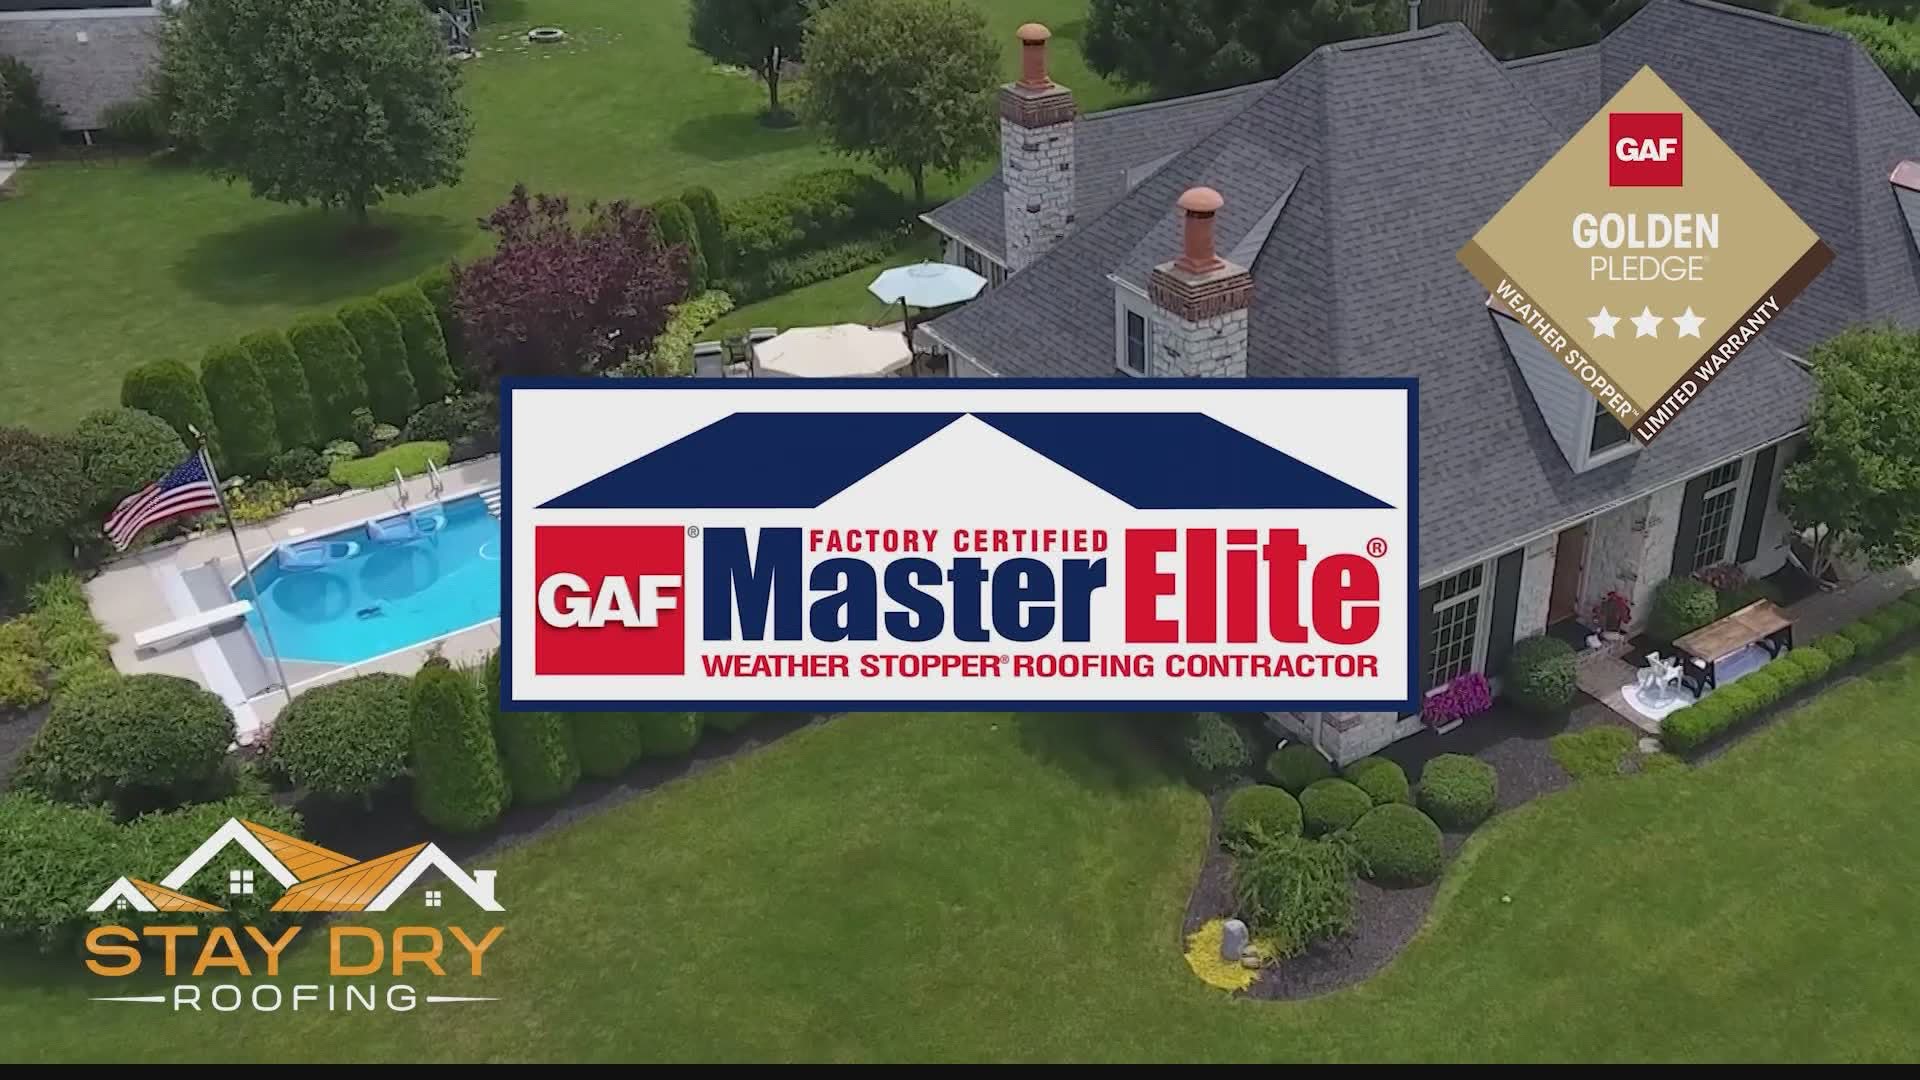 Stay Dry Roofing offers free inspections to assess potential roof damage.